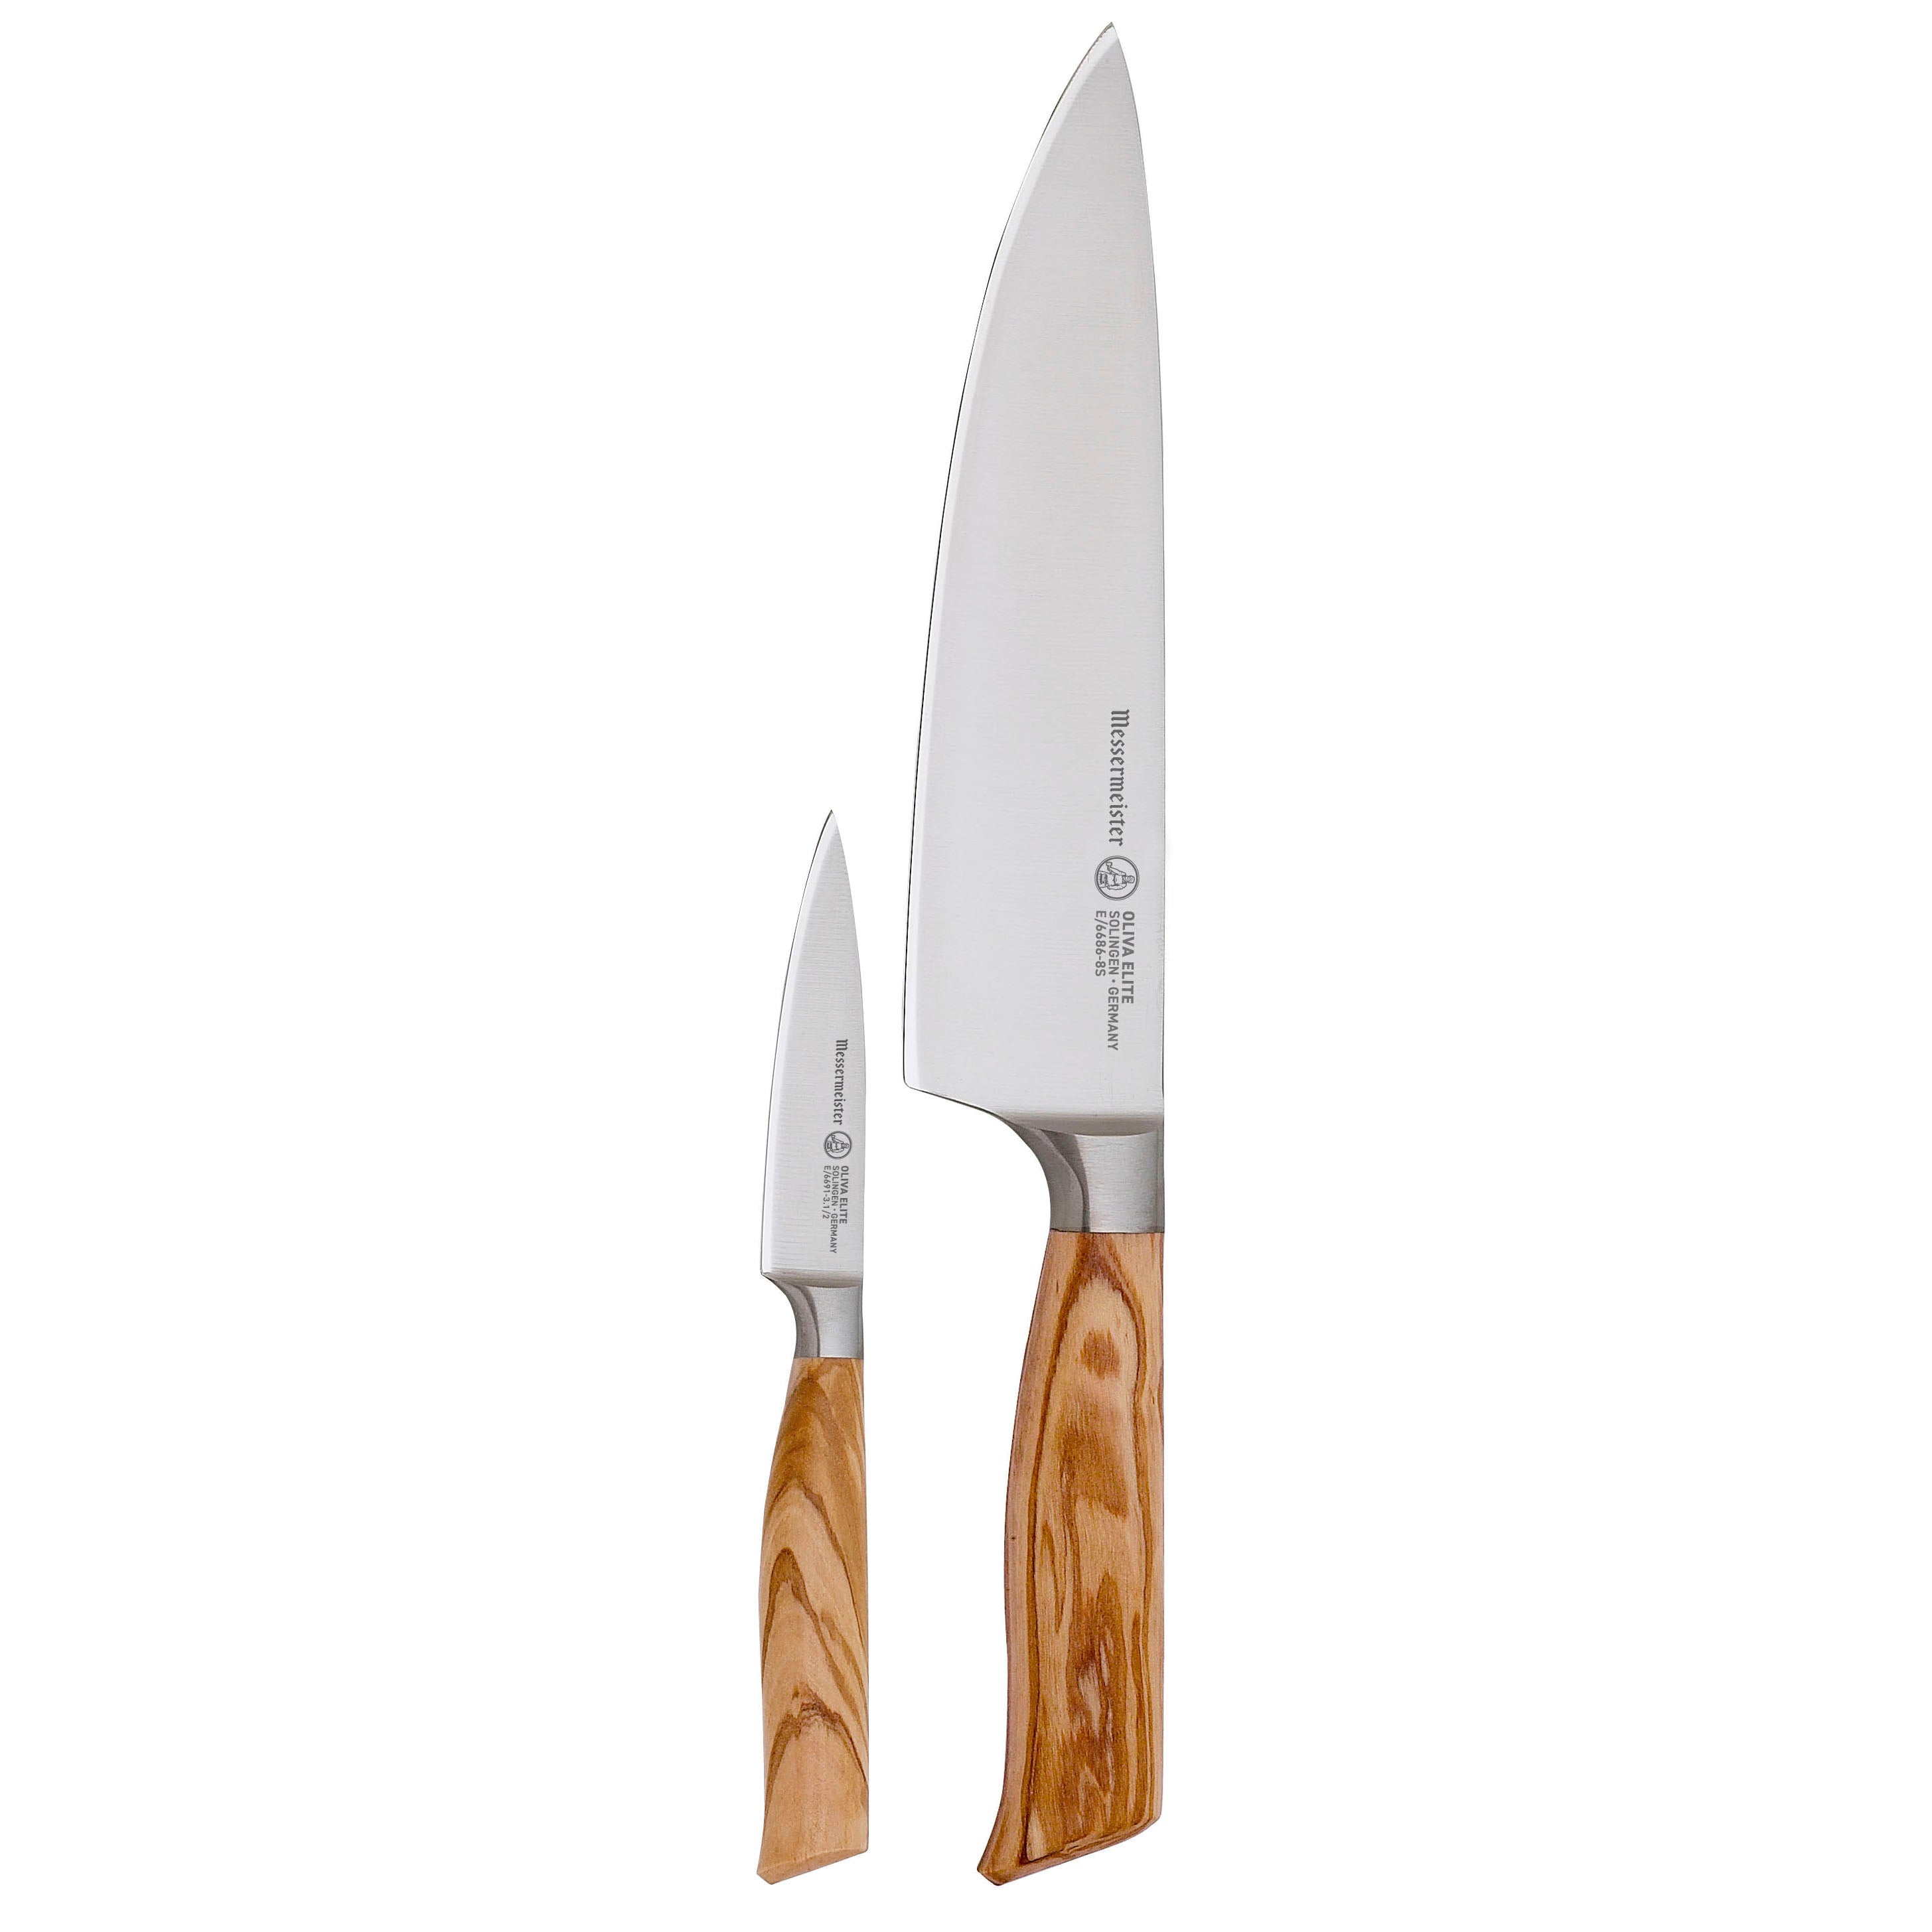 Messermeister Carbon 6.5 Chef's - April Bloomfield's Knife